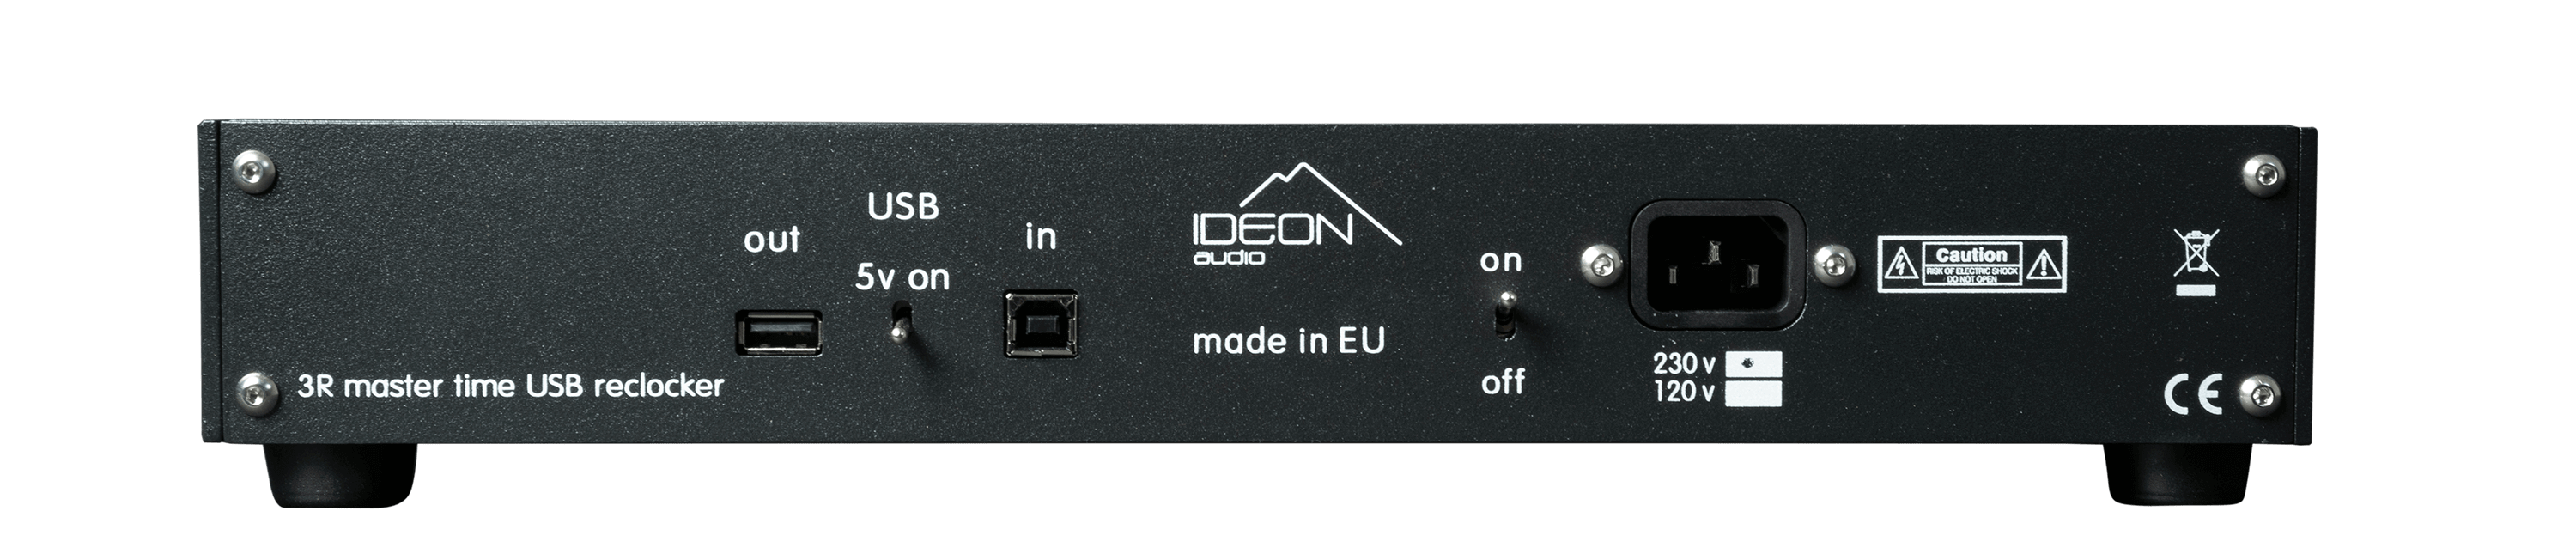 ideonaudio-3r-master-time-back-02-e1554205981585.png